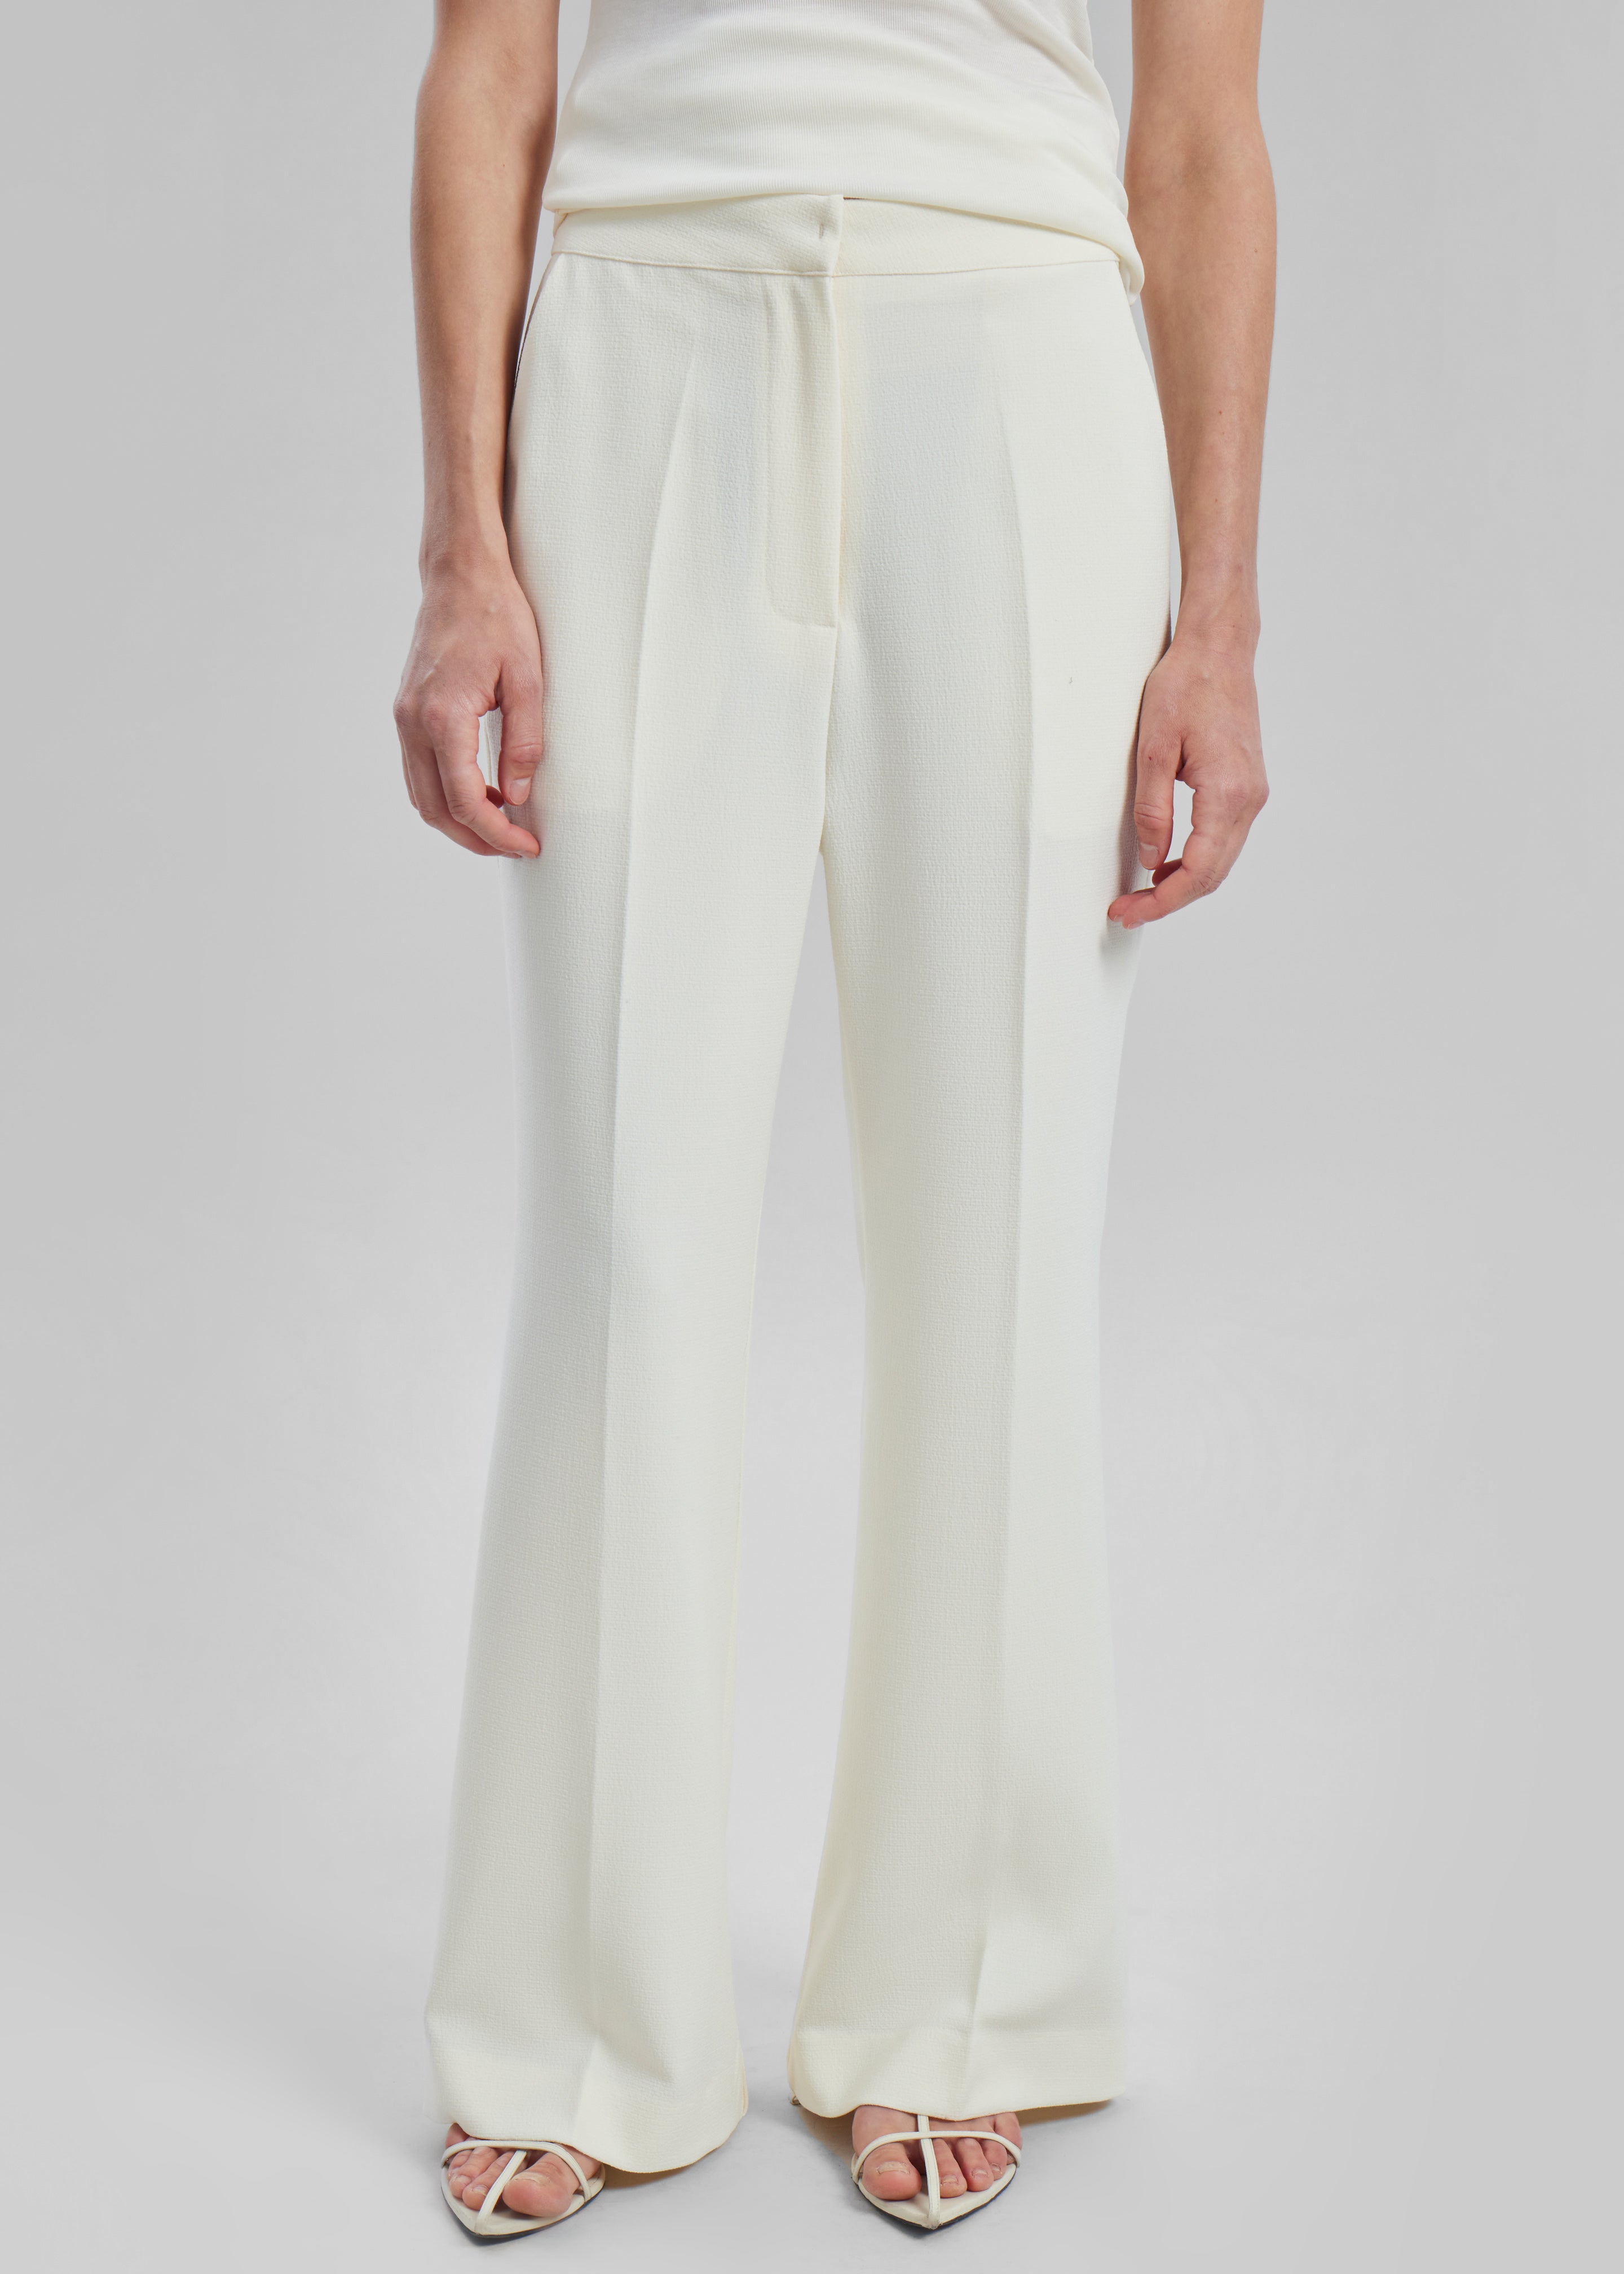 Layne Trousers - Off White - 4